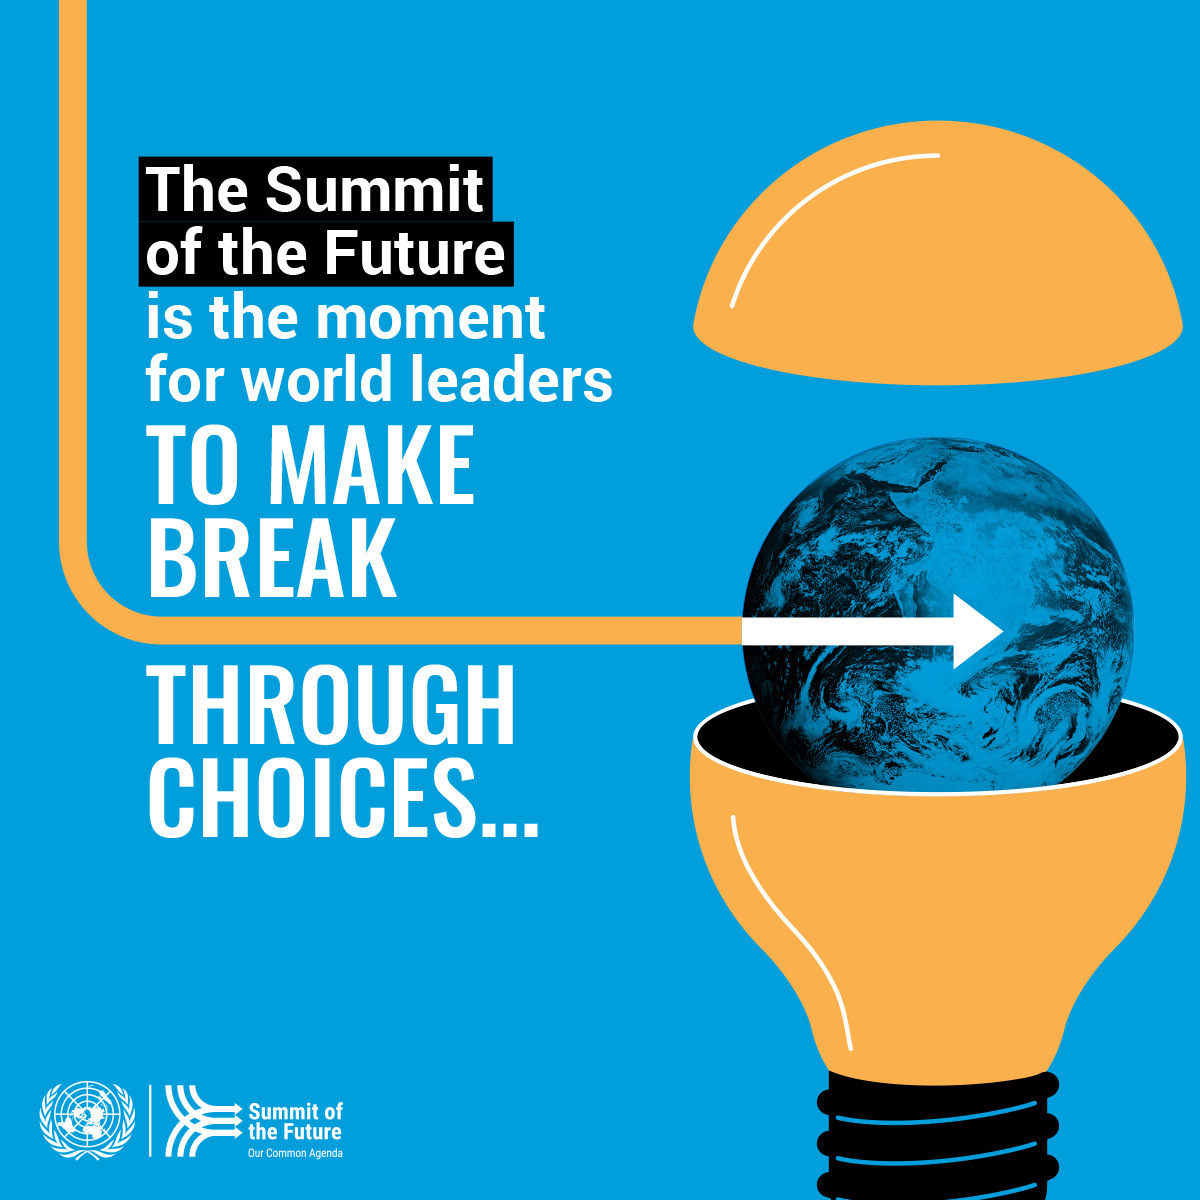 The Summit of the Future will be a unique opportunity for leaders to make breakthrough choices for some of the biggest challenges facing the world today. Learn what's on the agenda for September’s Summit. bit.ly/SotF2024 #OurCommonFuture